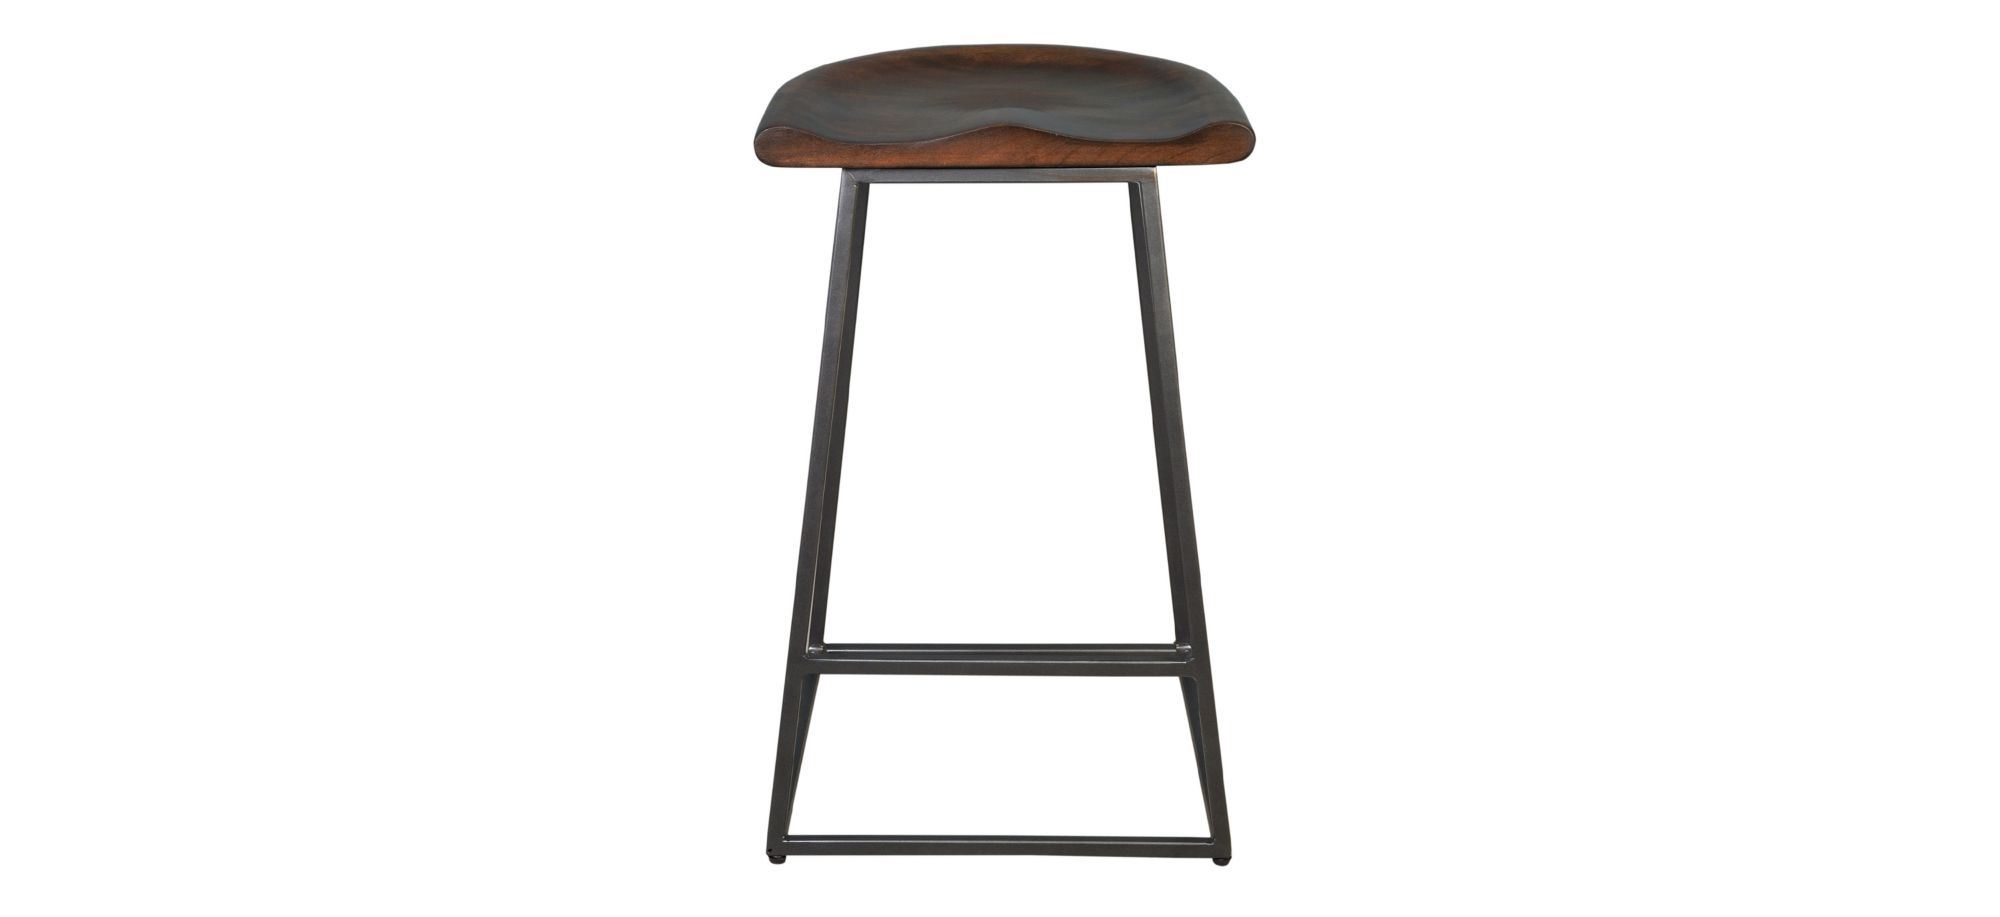 Jackman Counter Stools-Set of 2 in Brown by Moe's Home Collection